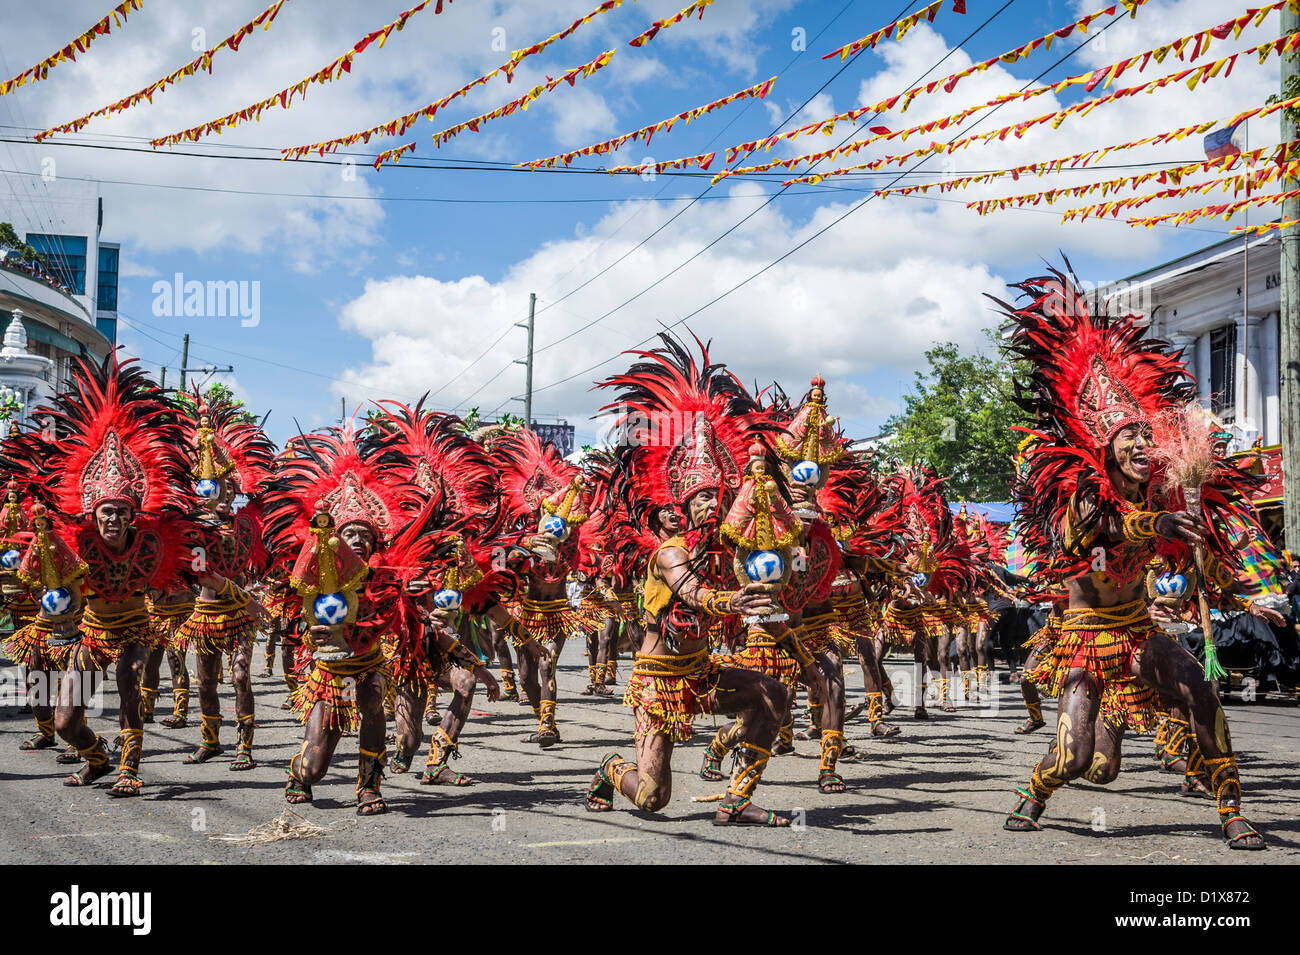 Participants of the dance contest during the celebration of Dinagyang in homage to 'The Santo Niño', Iloilo, Philippines, Asia Stock Photo